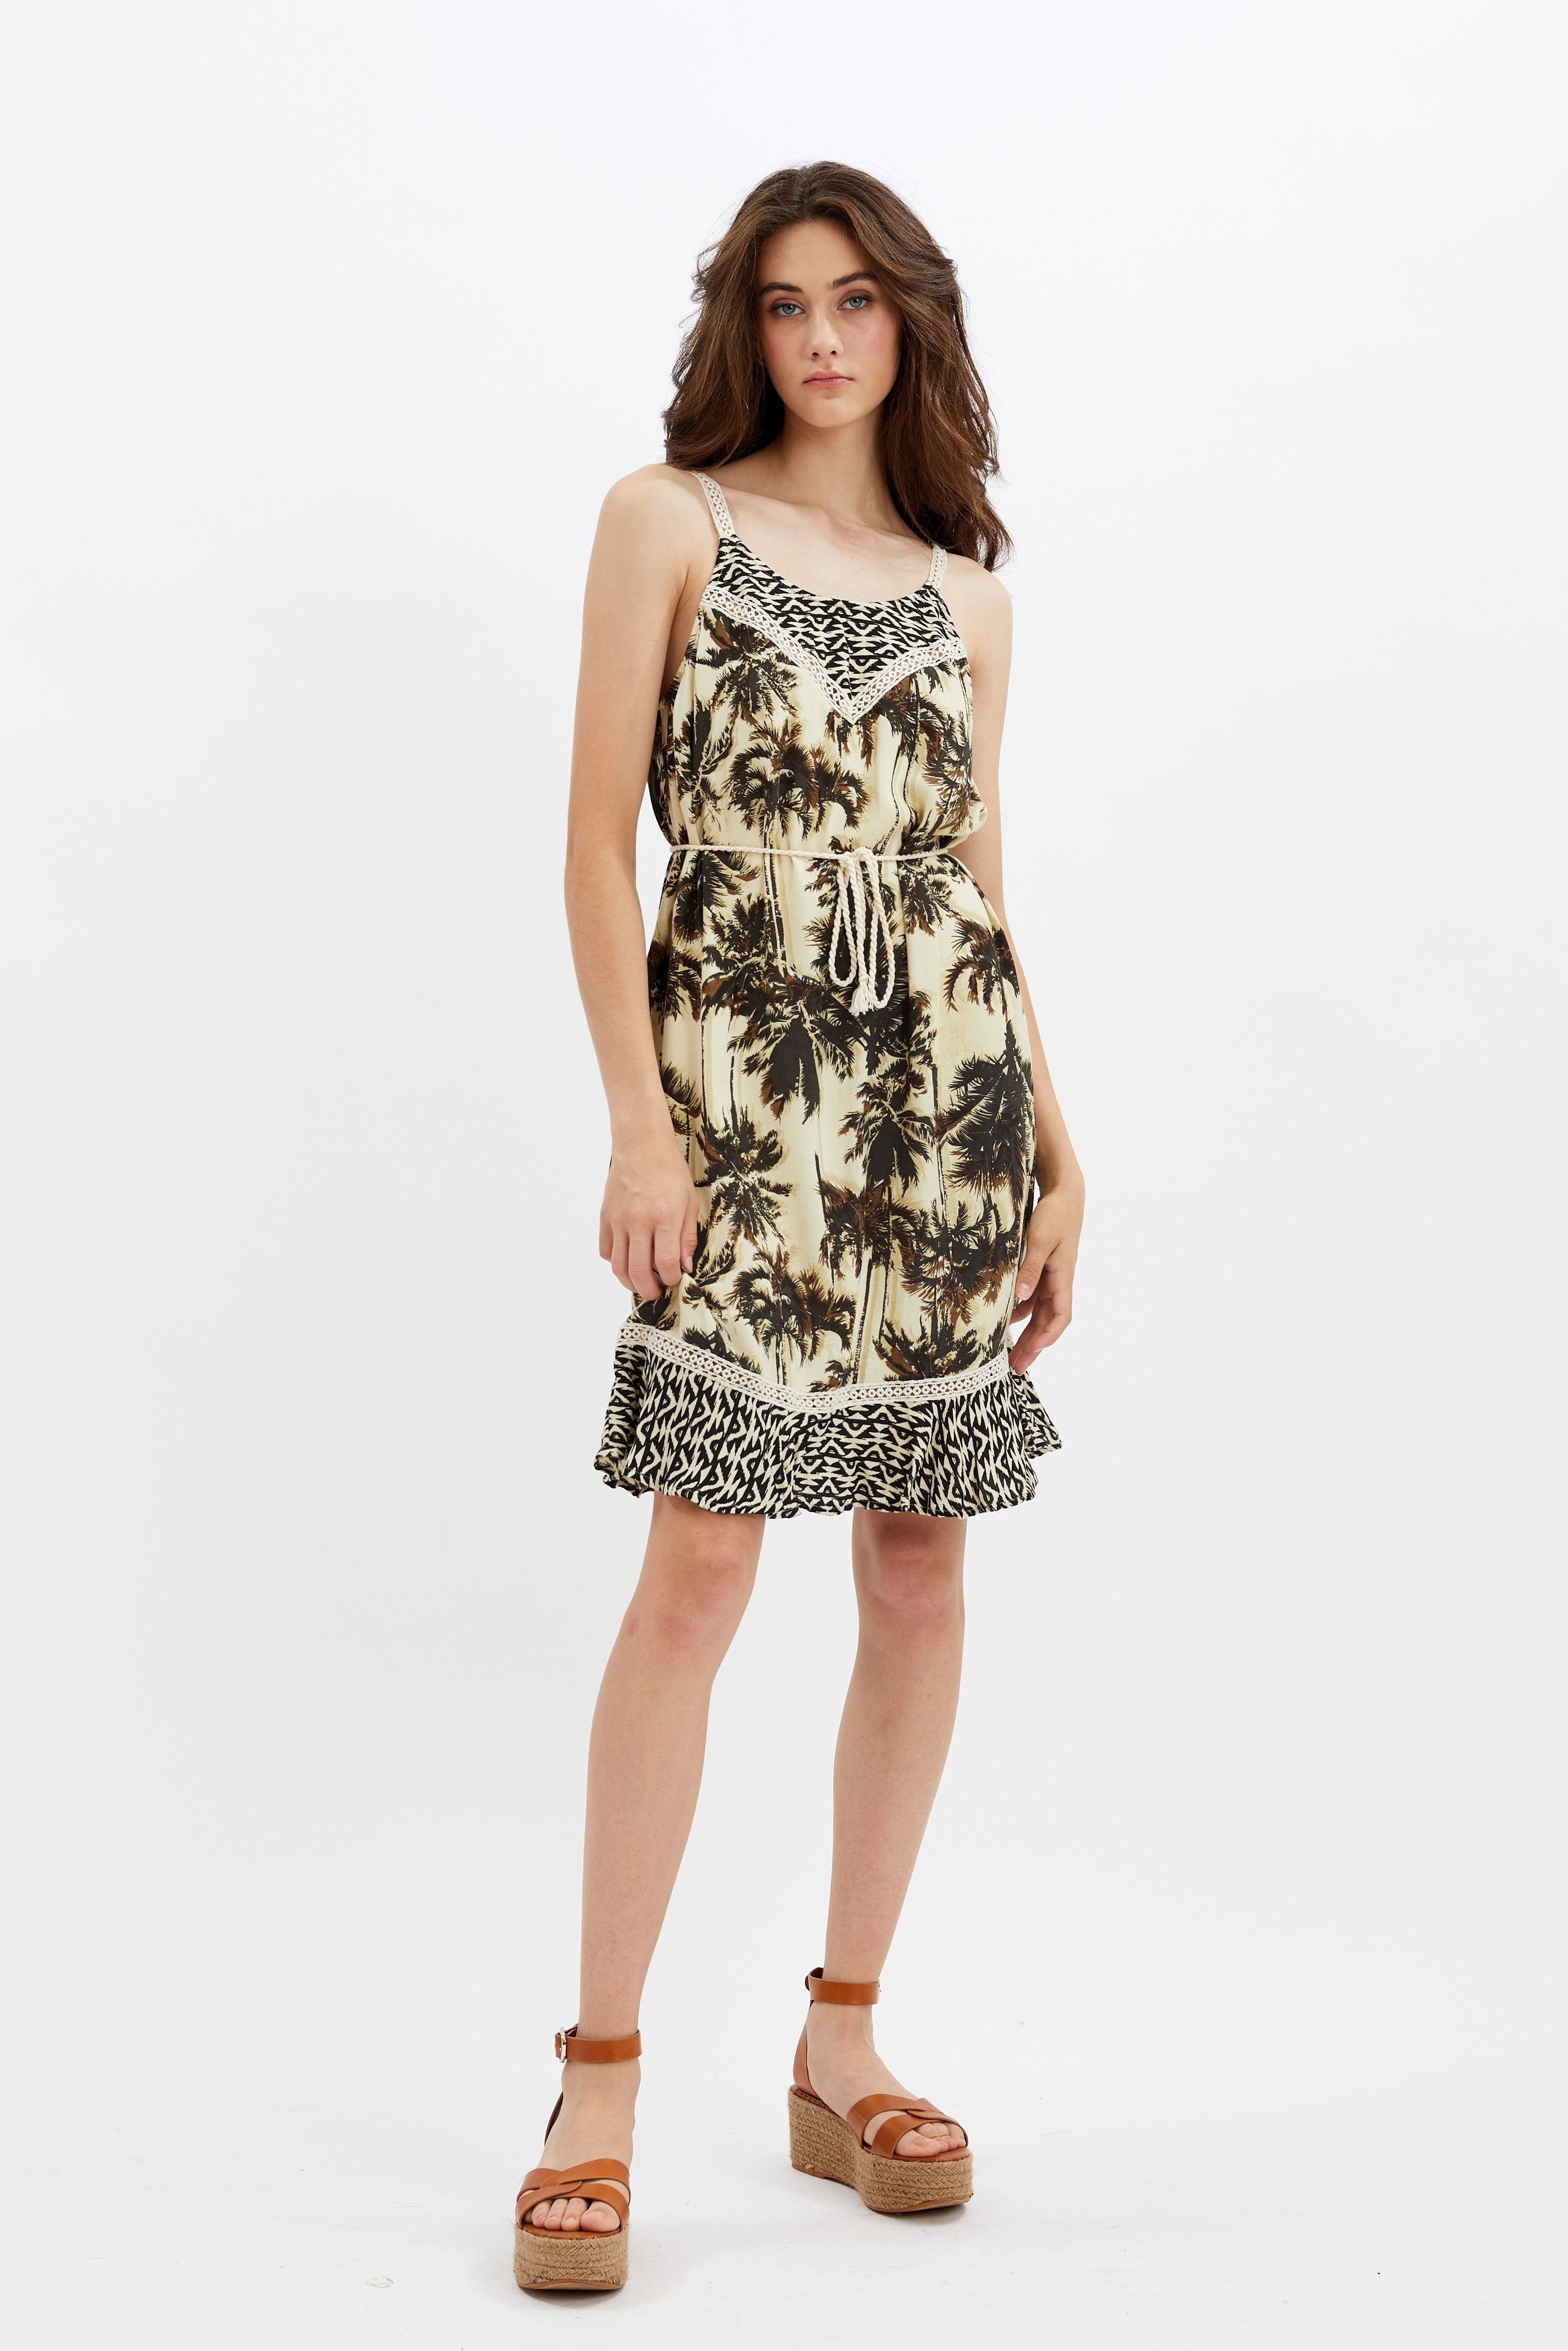 LUNA | Lined Dress with Lace Insert & Cord Tie BK